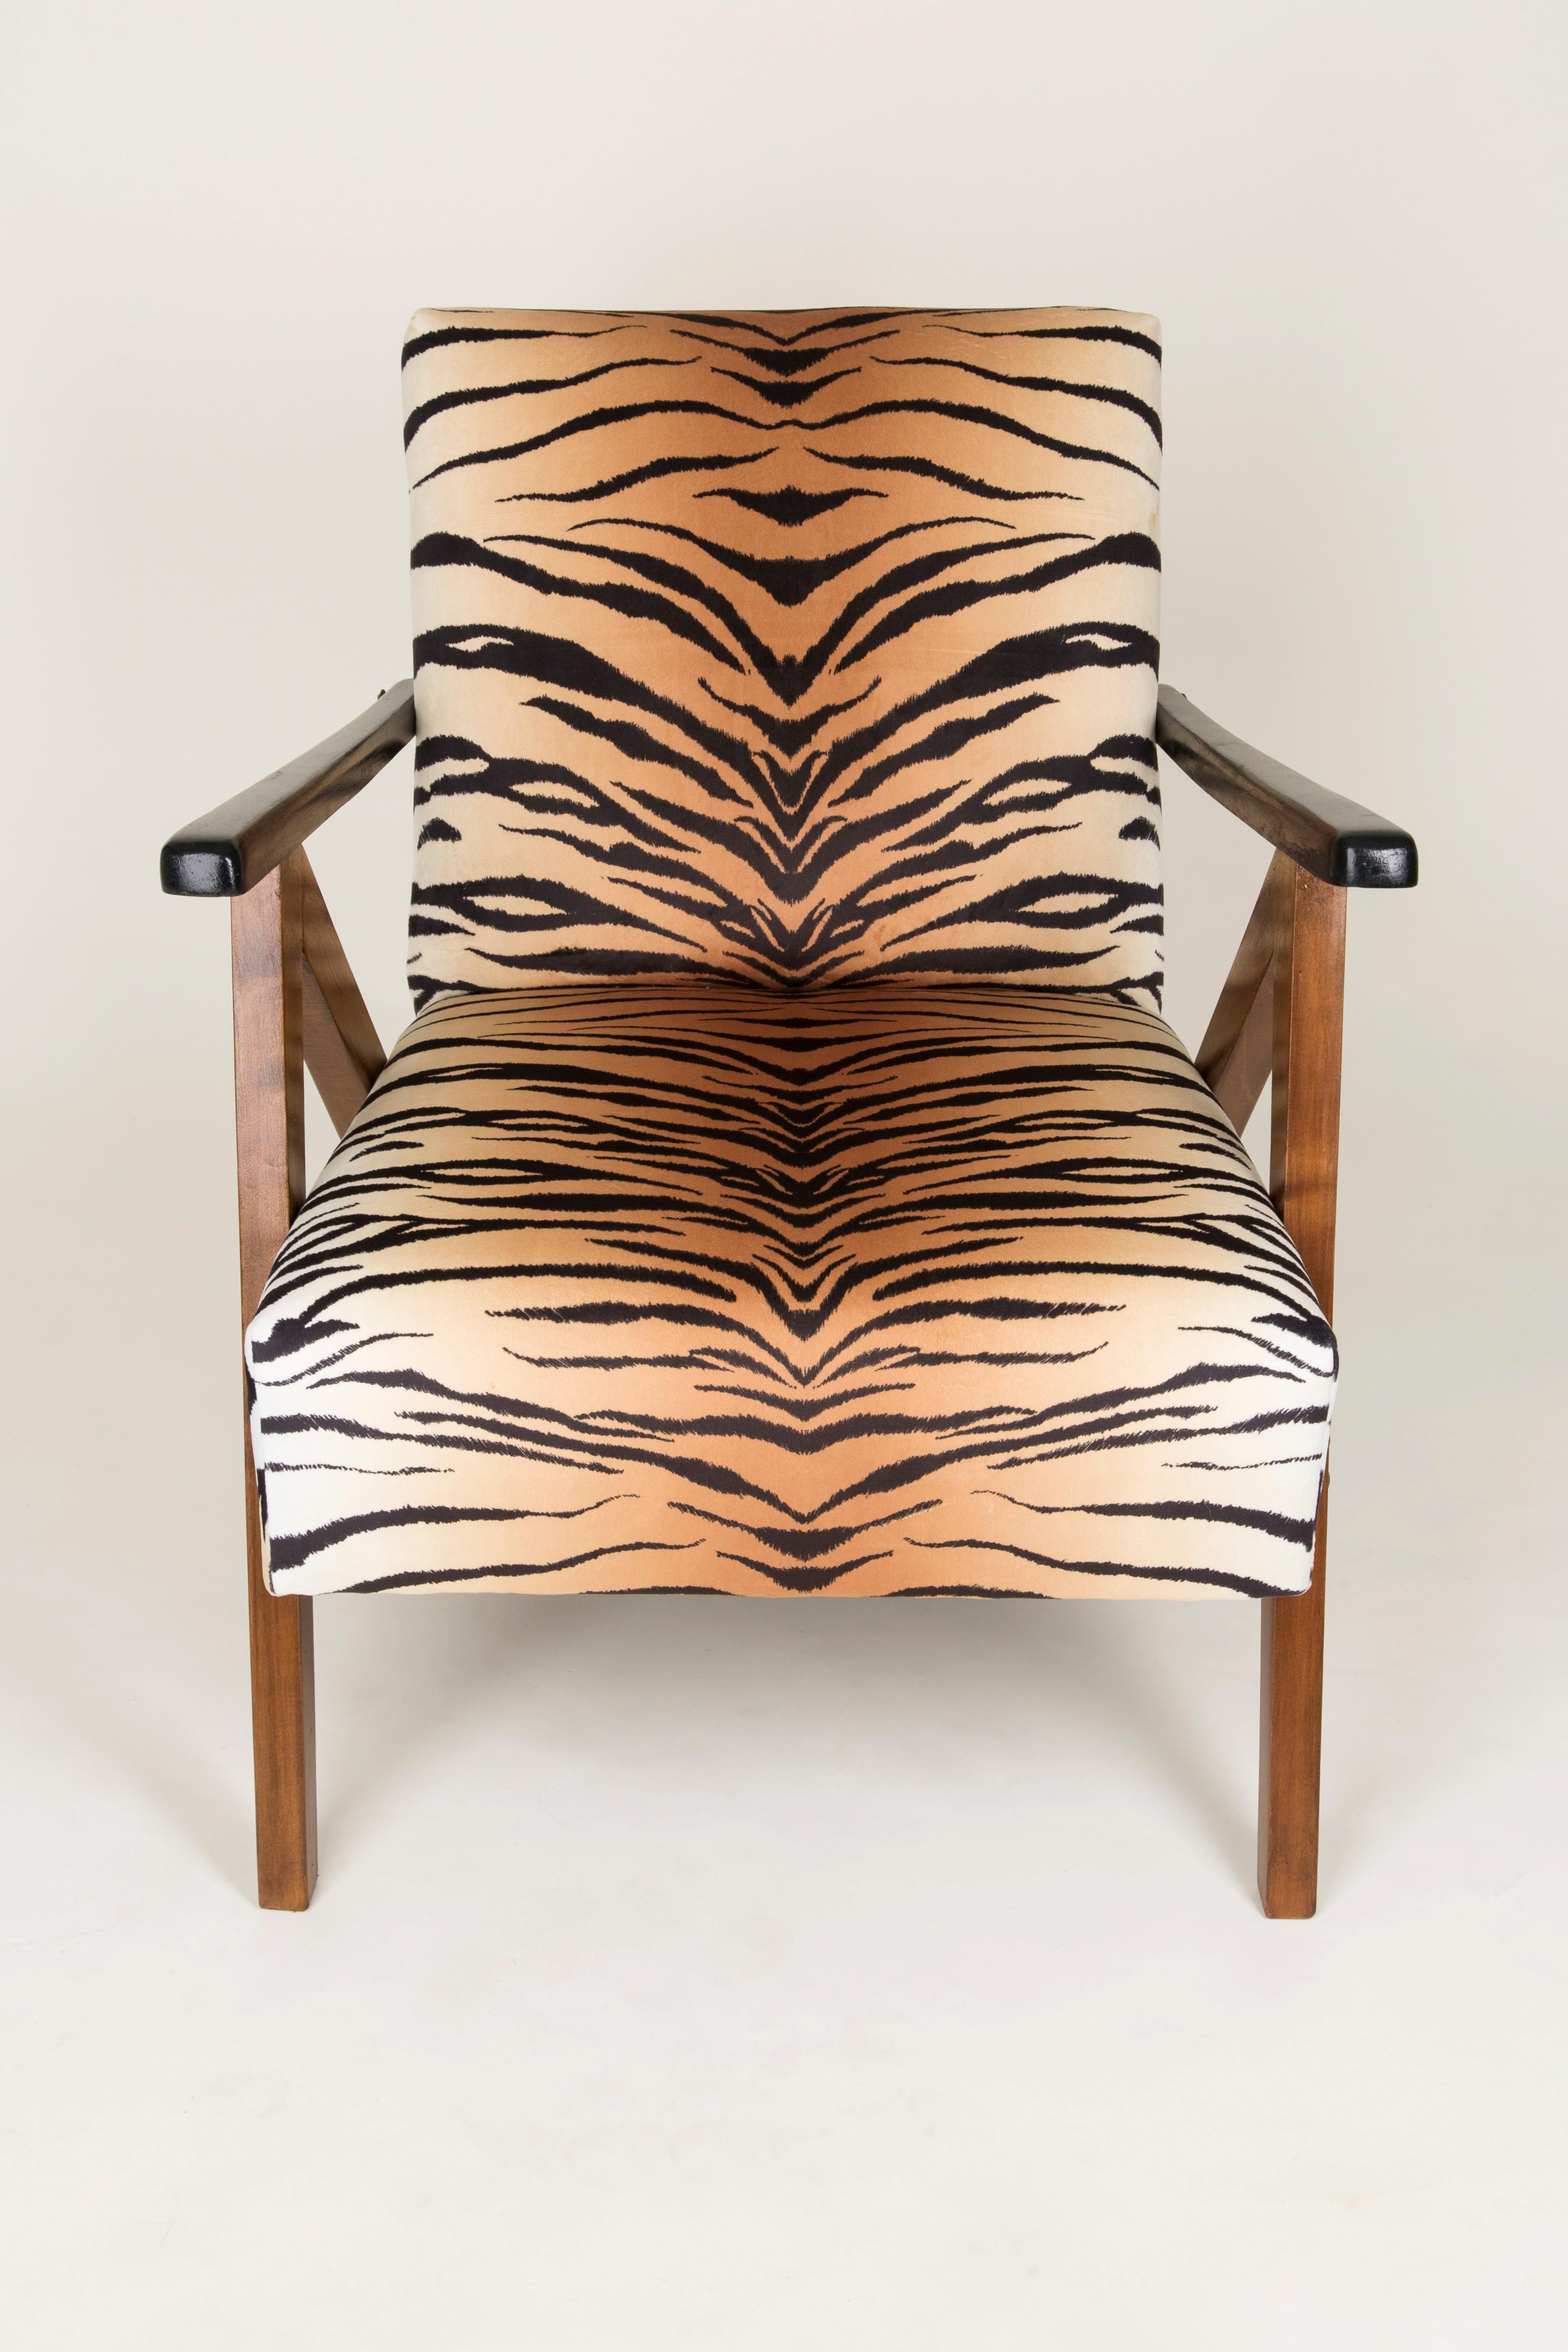 20th Century Set of Two Mid-Century Modern Tiger Print Armchairs, 1960s, Germany For Sale